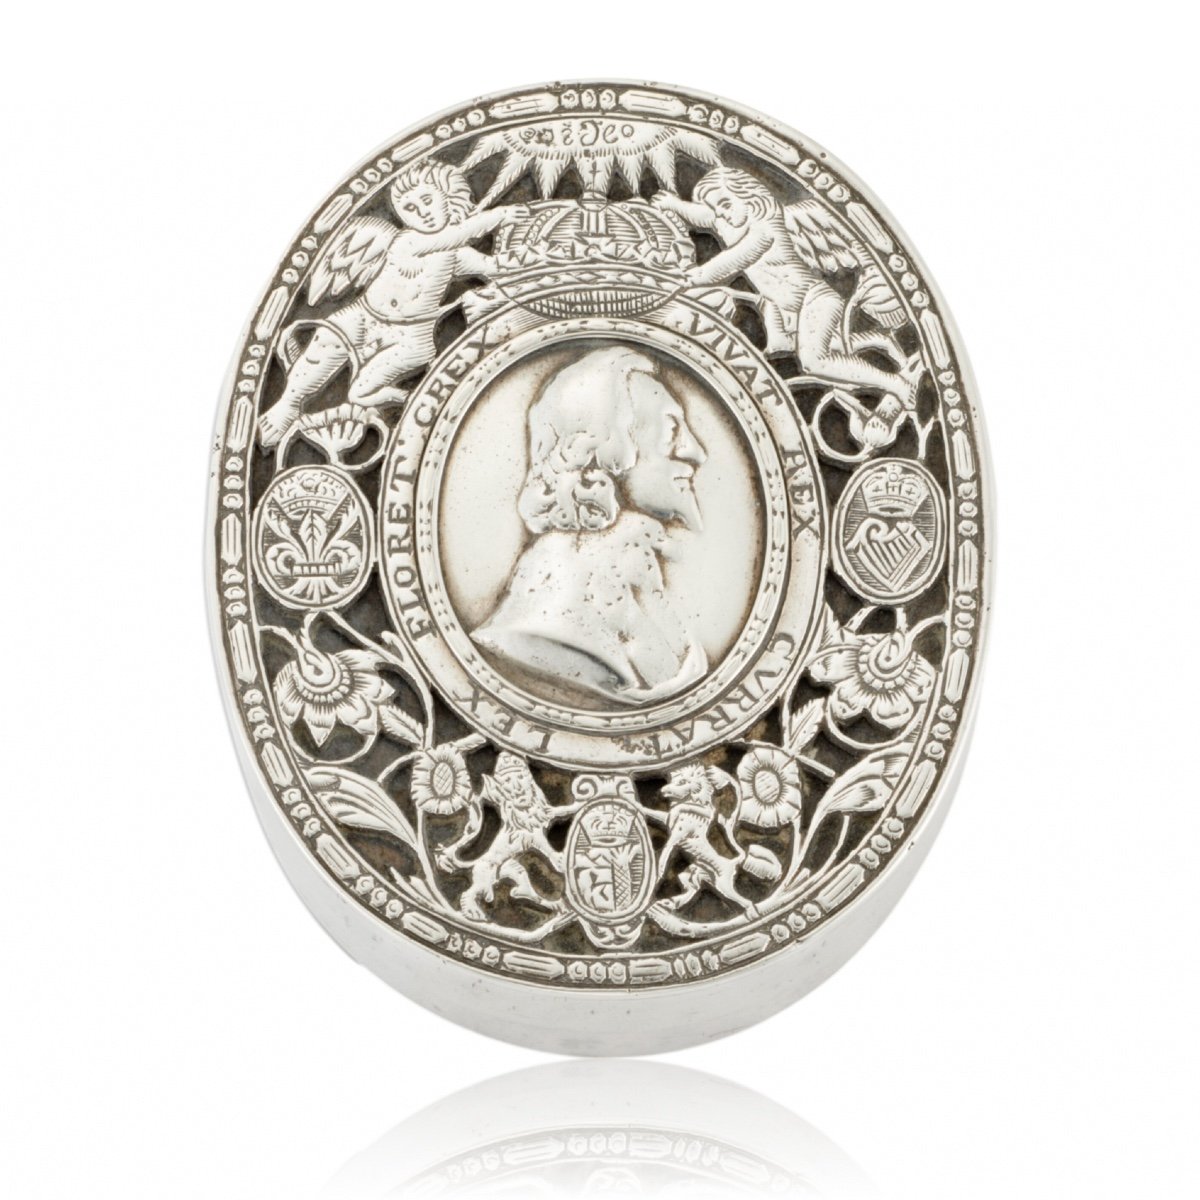 Silver Tobacco Box Commemorating The Martyred King Charles I (c.1600-1649).